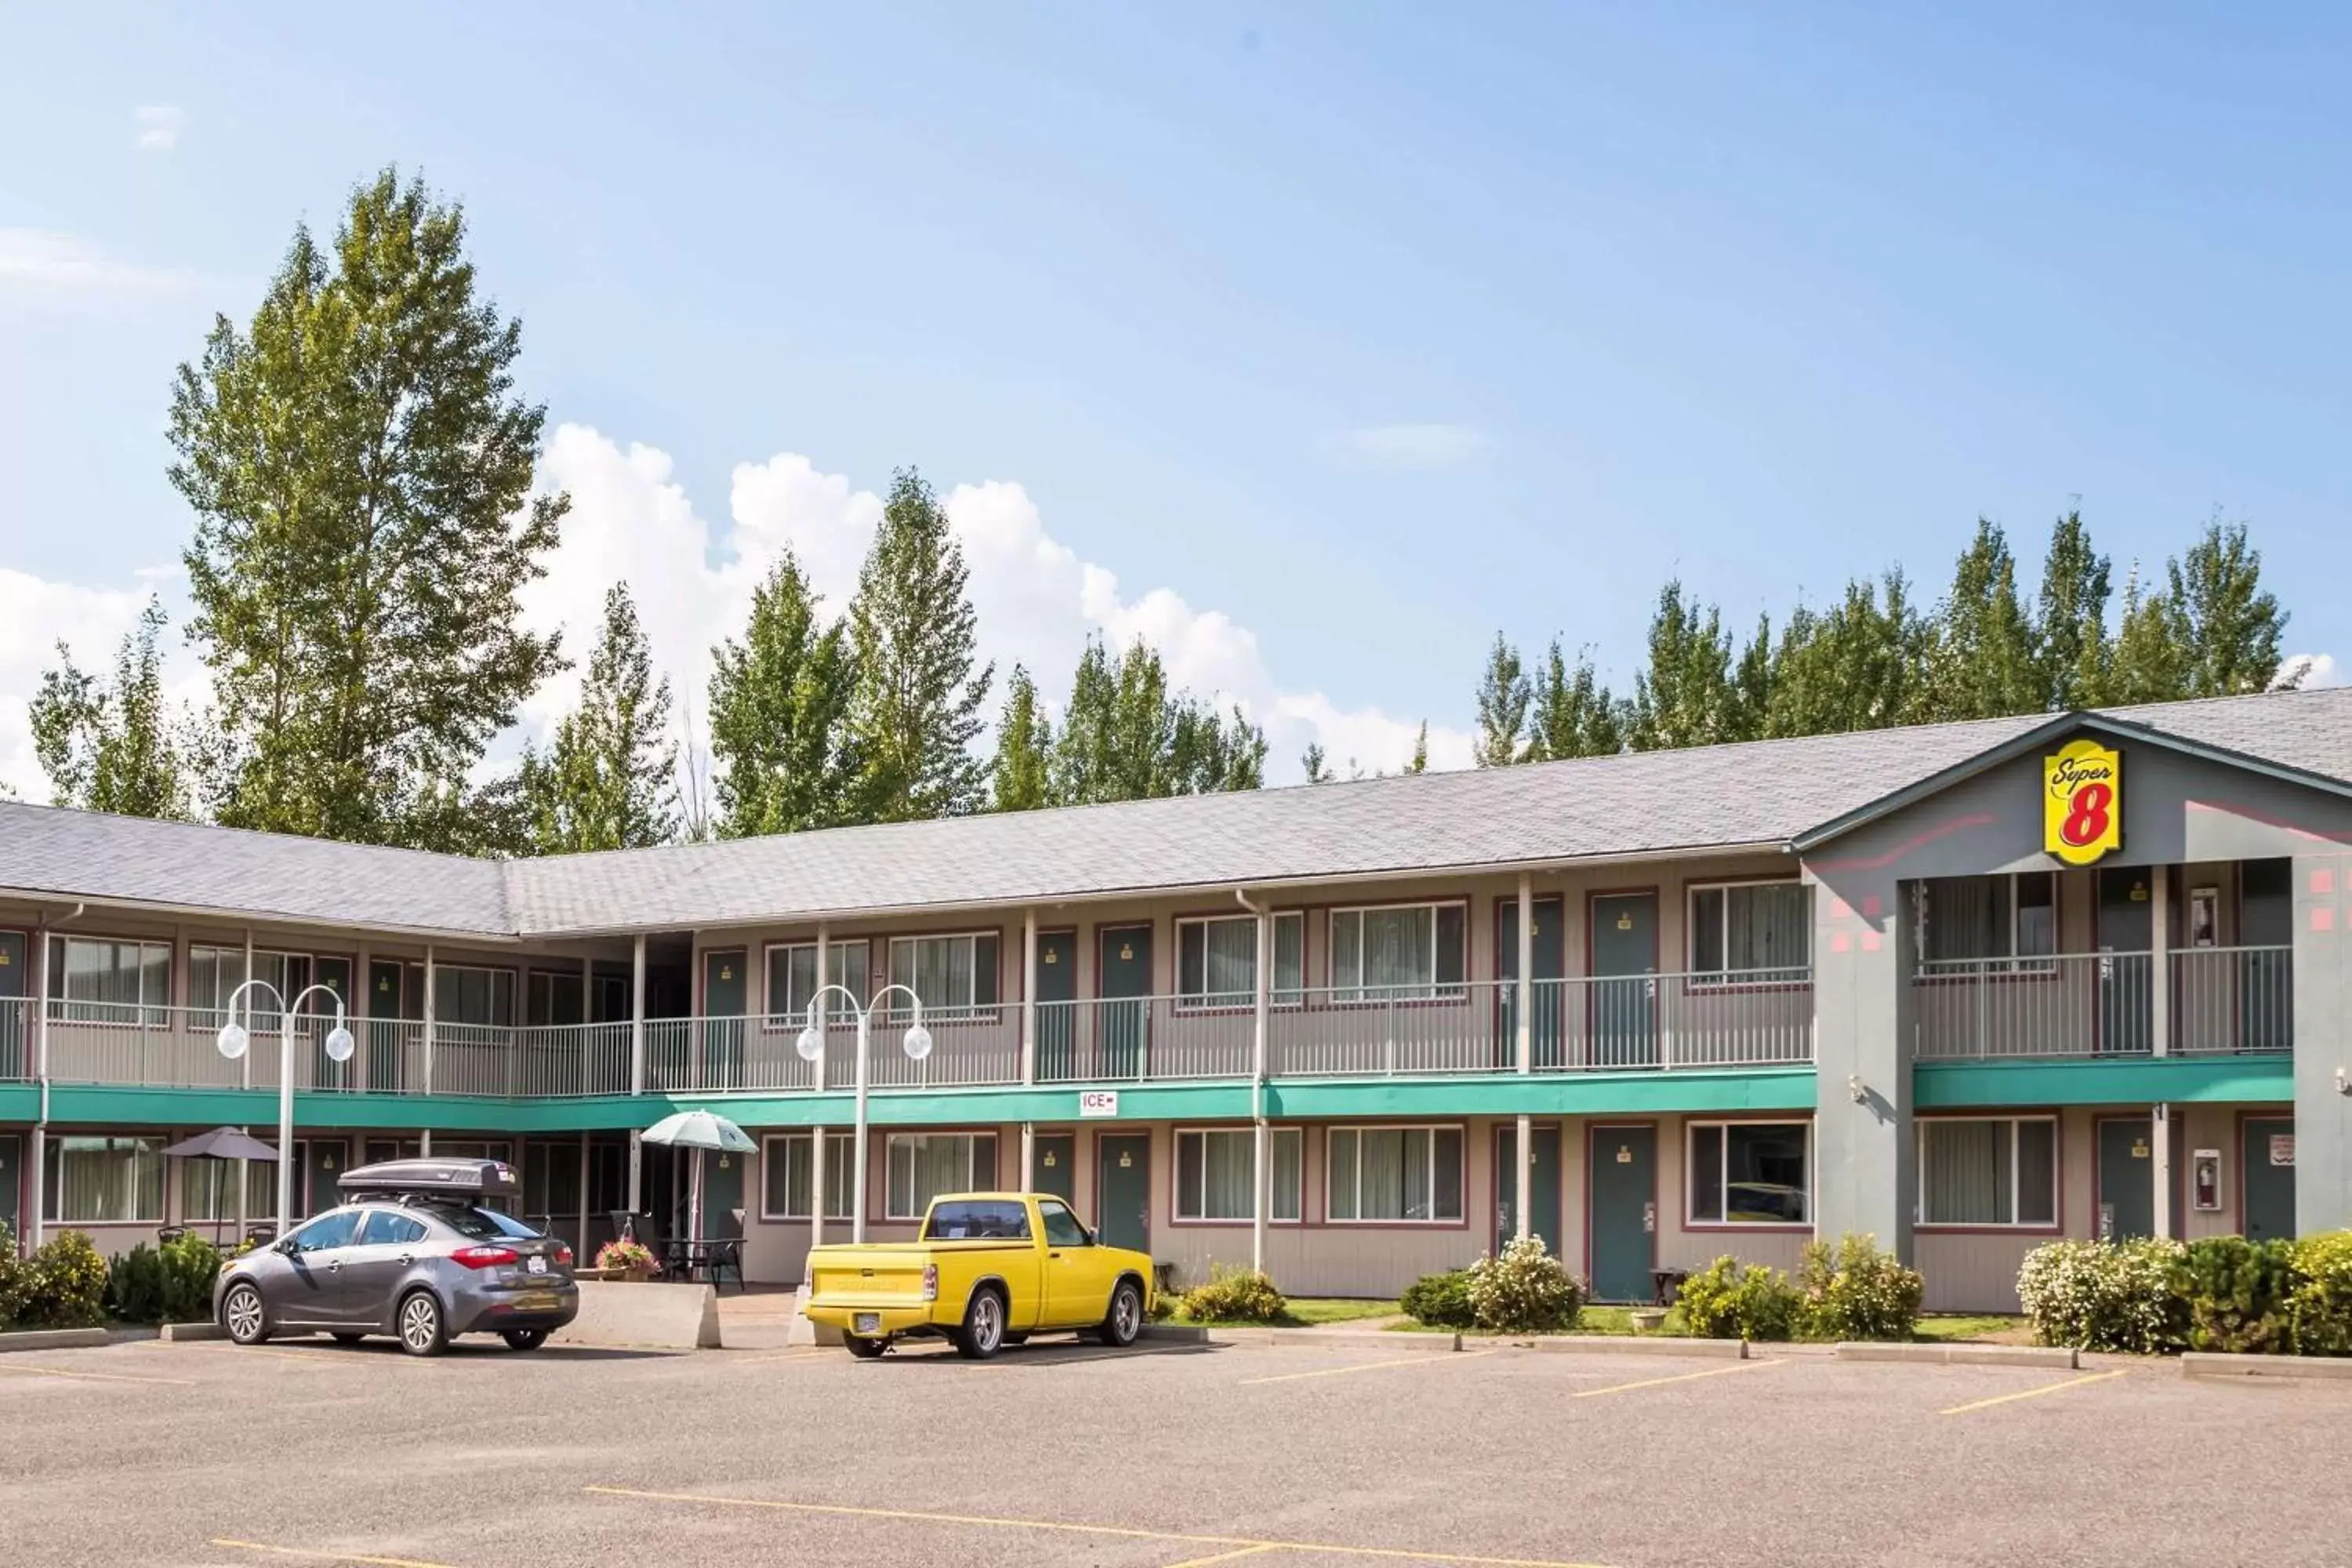 Property Building in Super 8 by Wyndham Quesnel BC